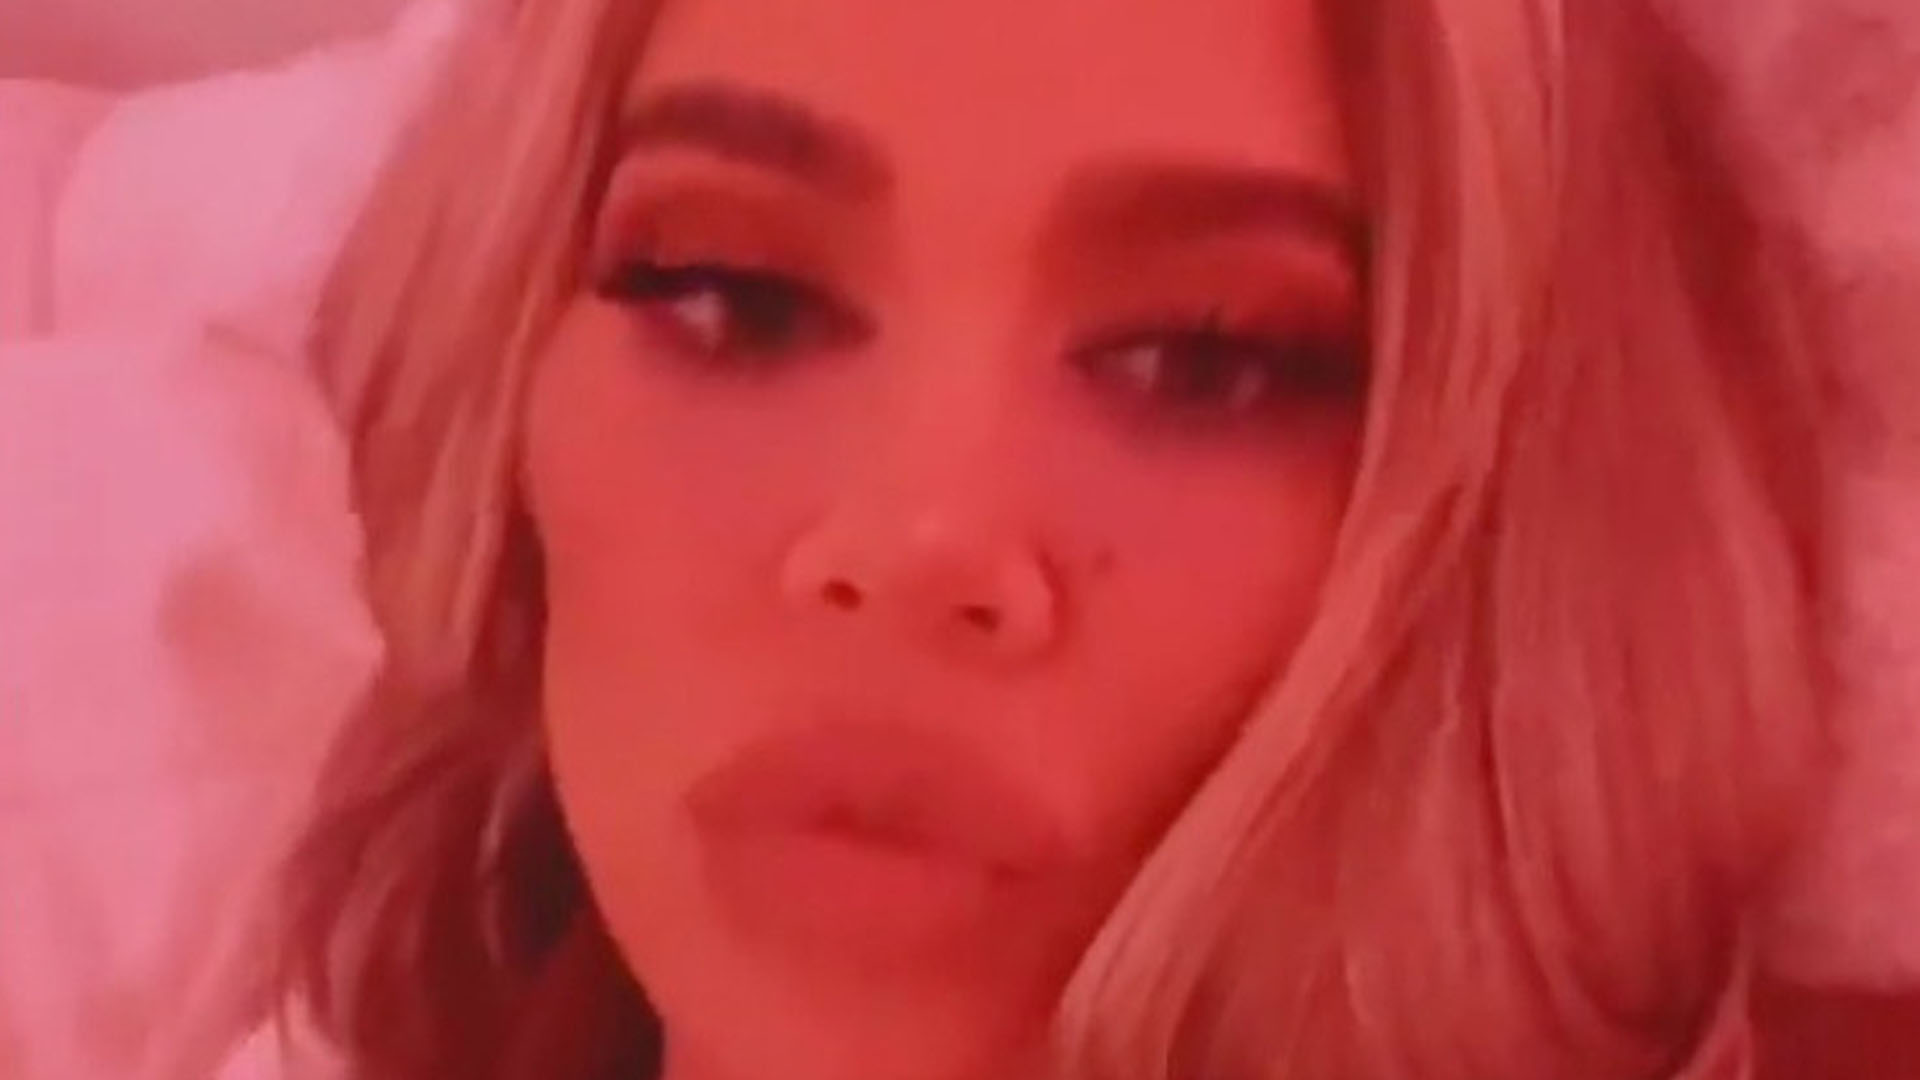 Khloe Kardashian slammed for letting daughter True, 4, watch show about her dad Tristan Thompson's love child scandal